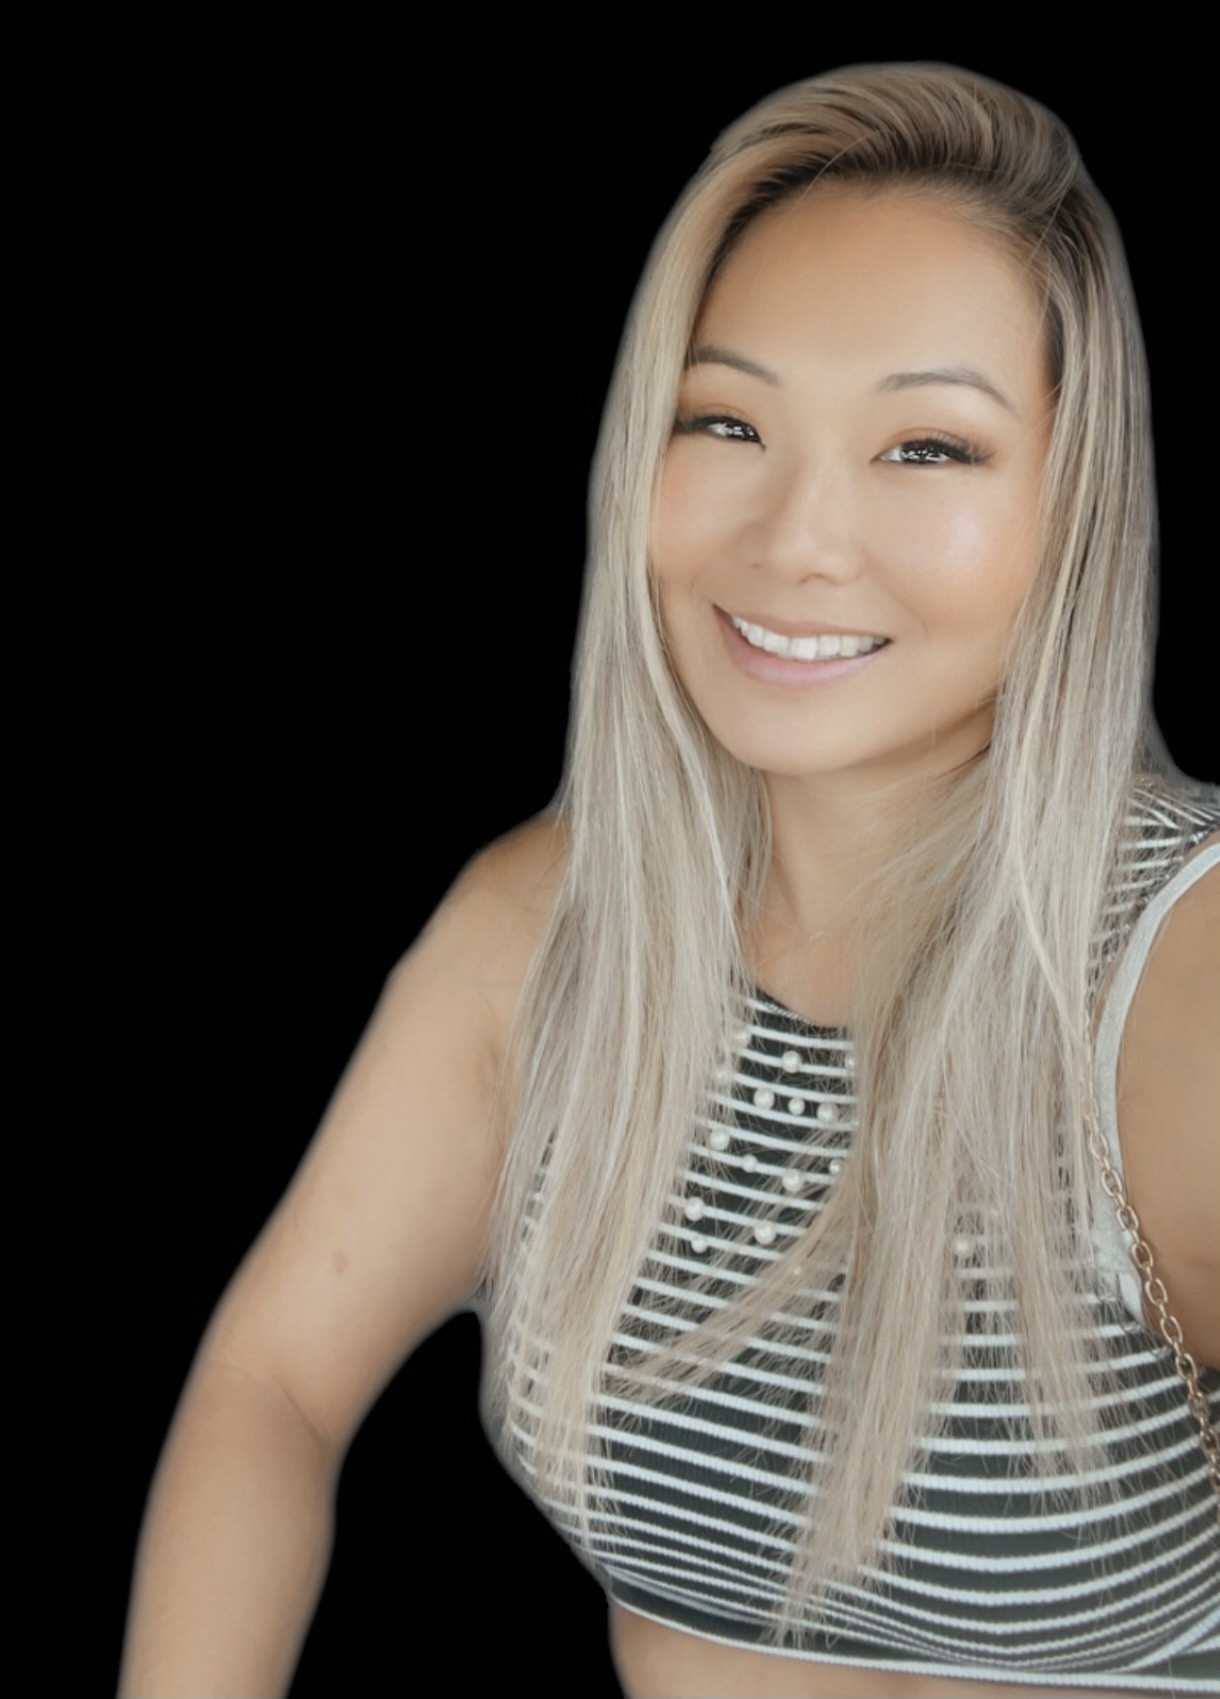 This is a photo of SIMONE FUJIKAWA. This professional services CORAL SPRINGS, FL 33076 and the surrounding areas.